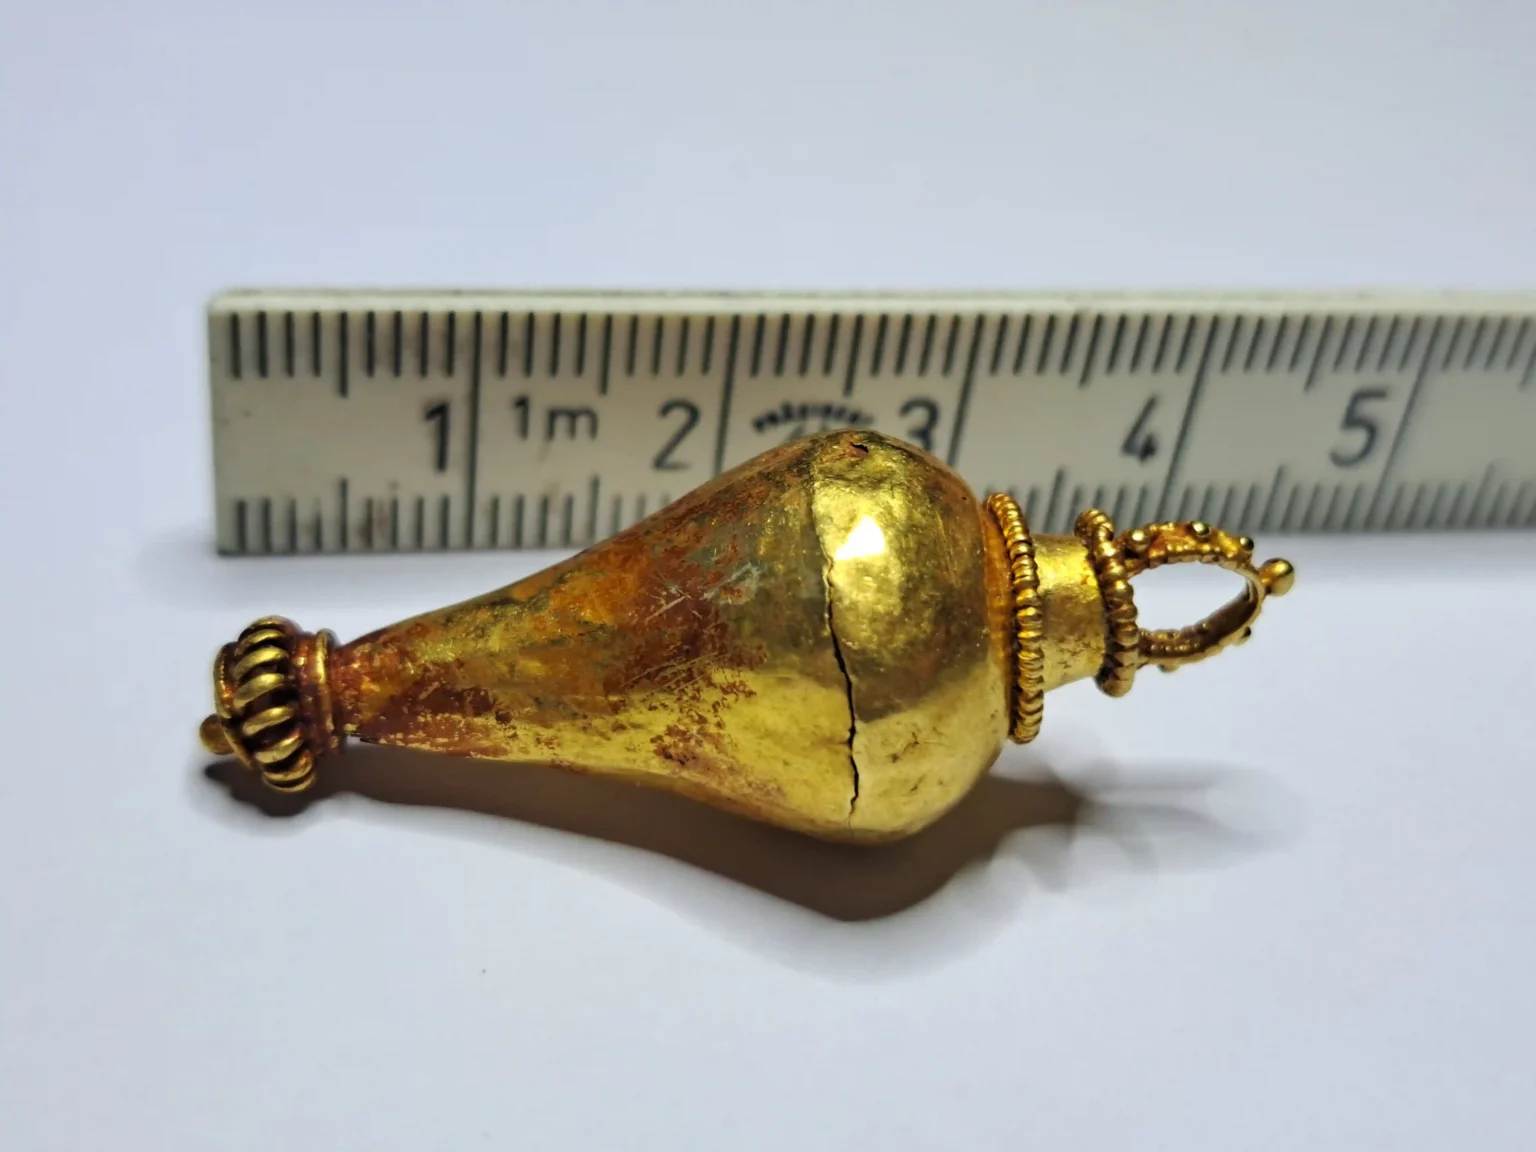 Holidaymaker Carlo Bast discovers a rare 2,000-year-old gold pendant while fossil hunting on Rügen Island. Now handed to state authorities, it awaits future museum display.